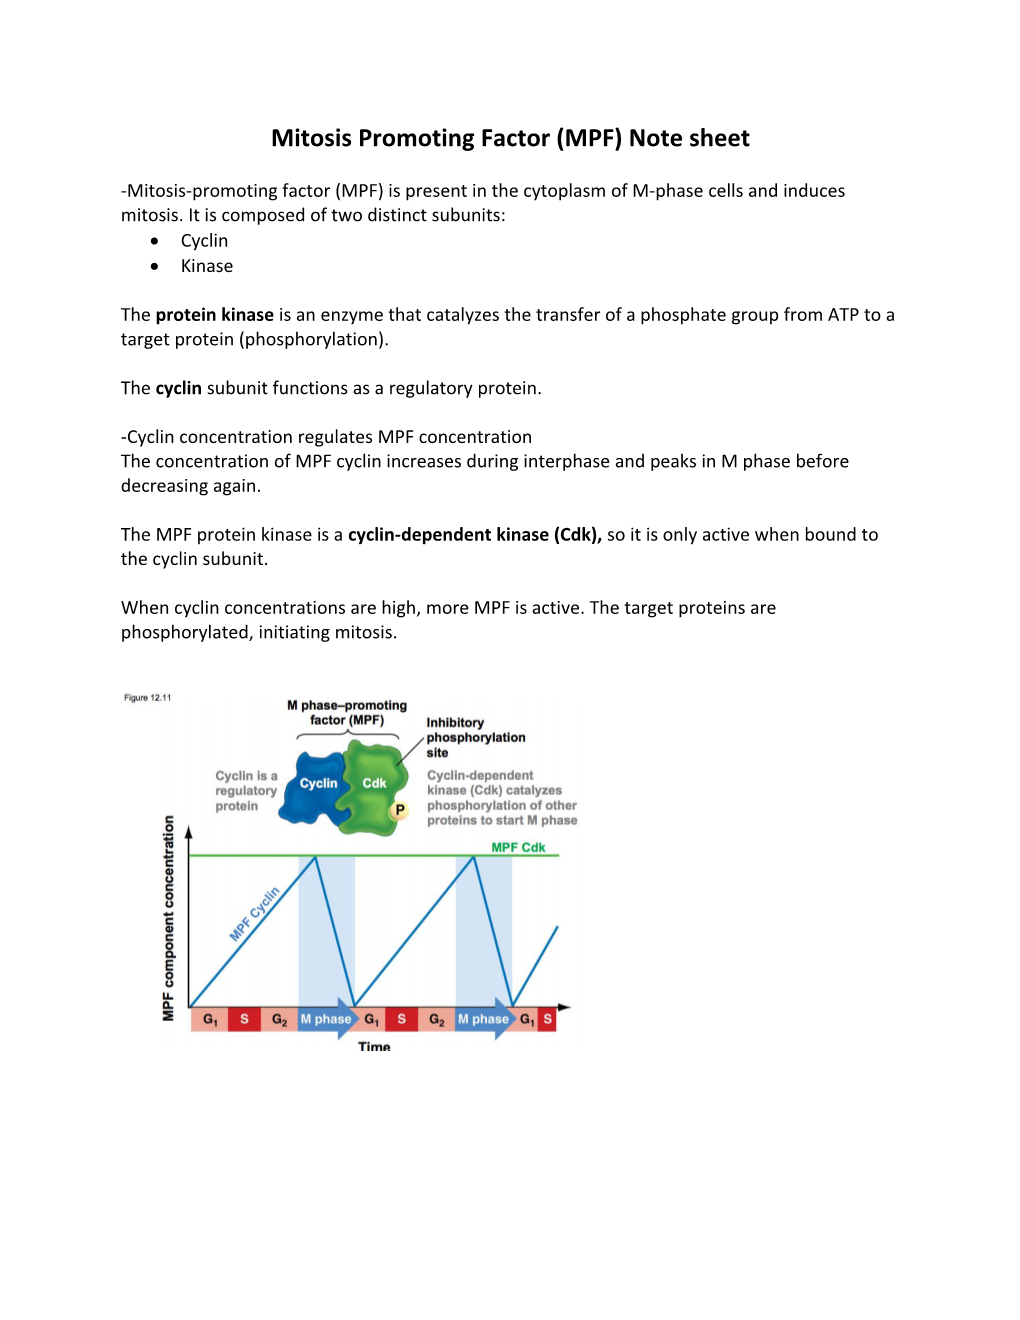 Mitosis Promoting Factor (MPF) Note Sheet